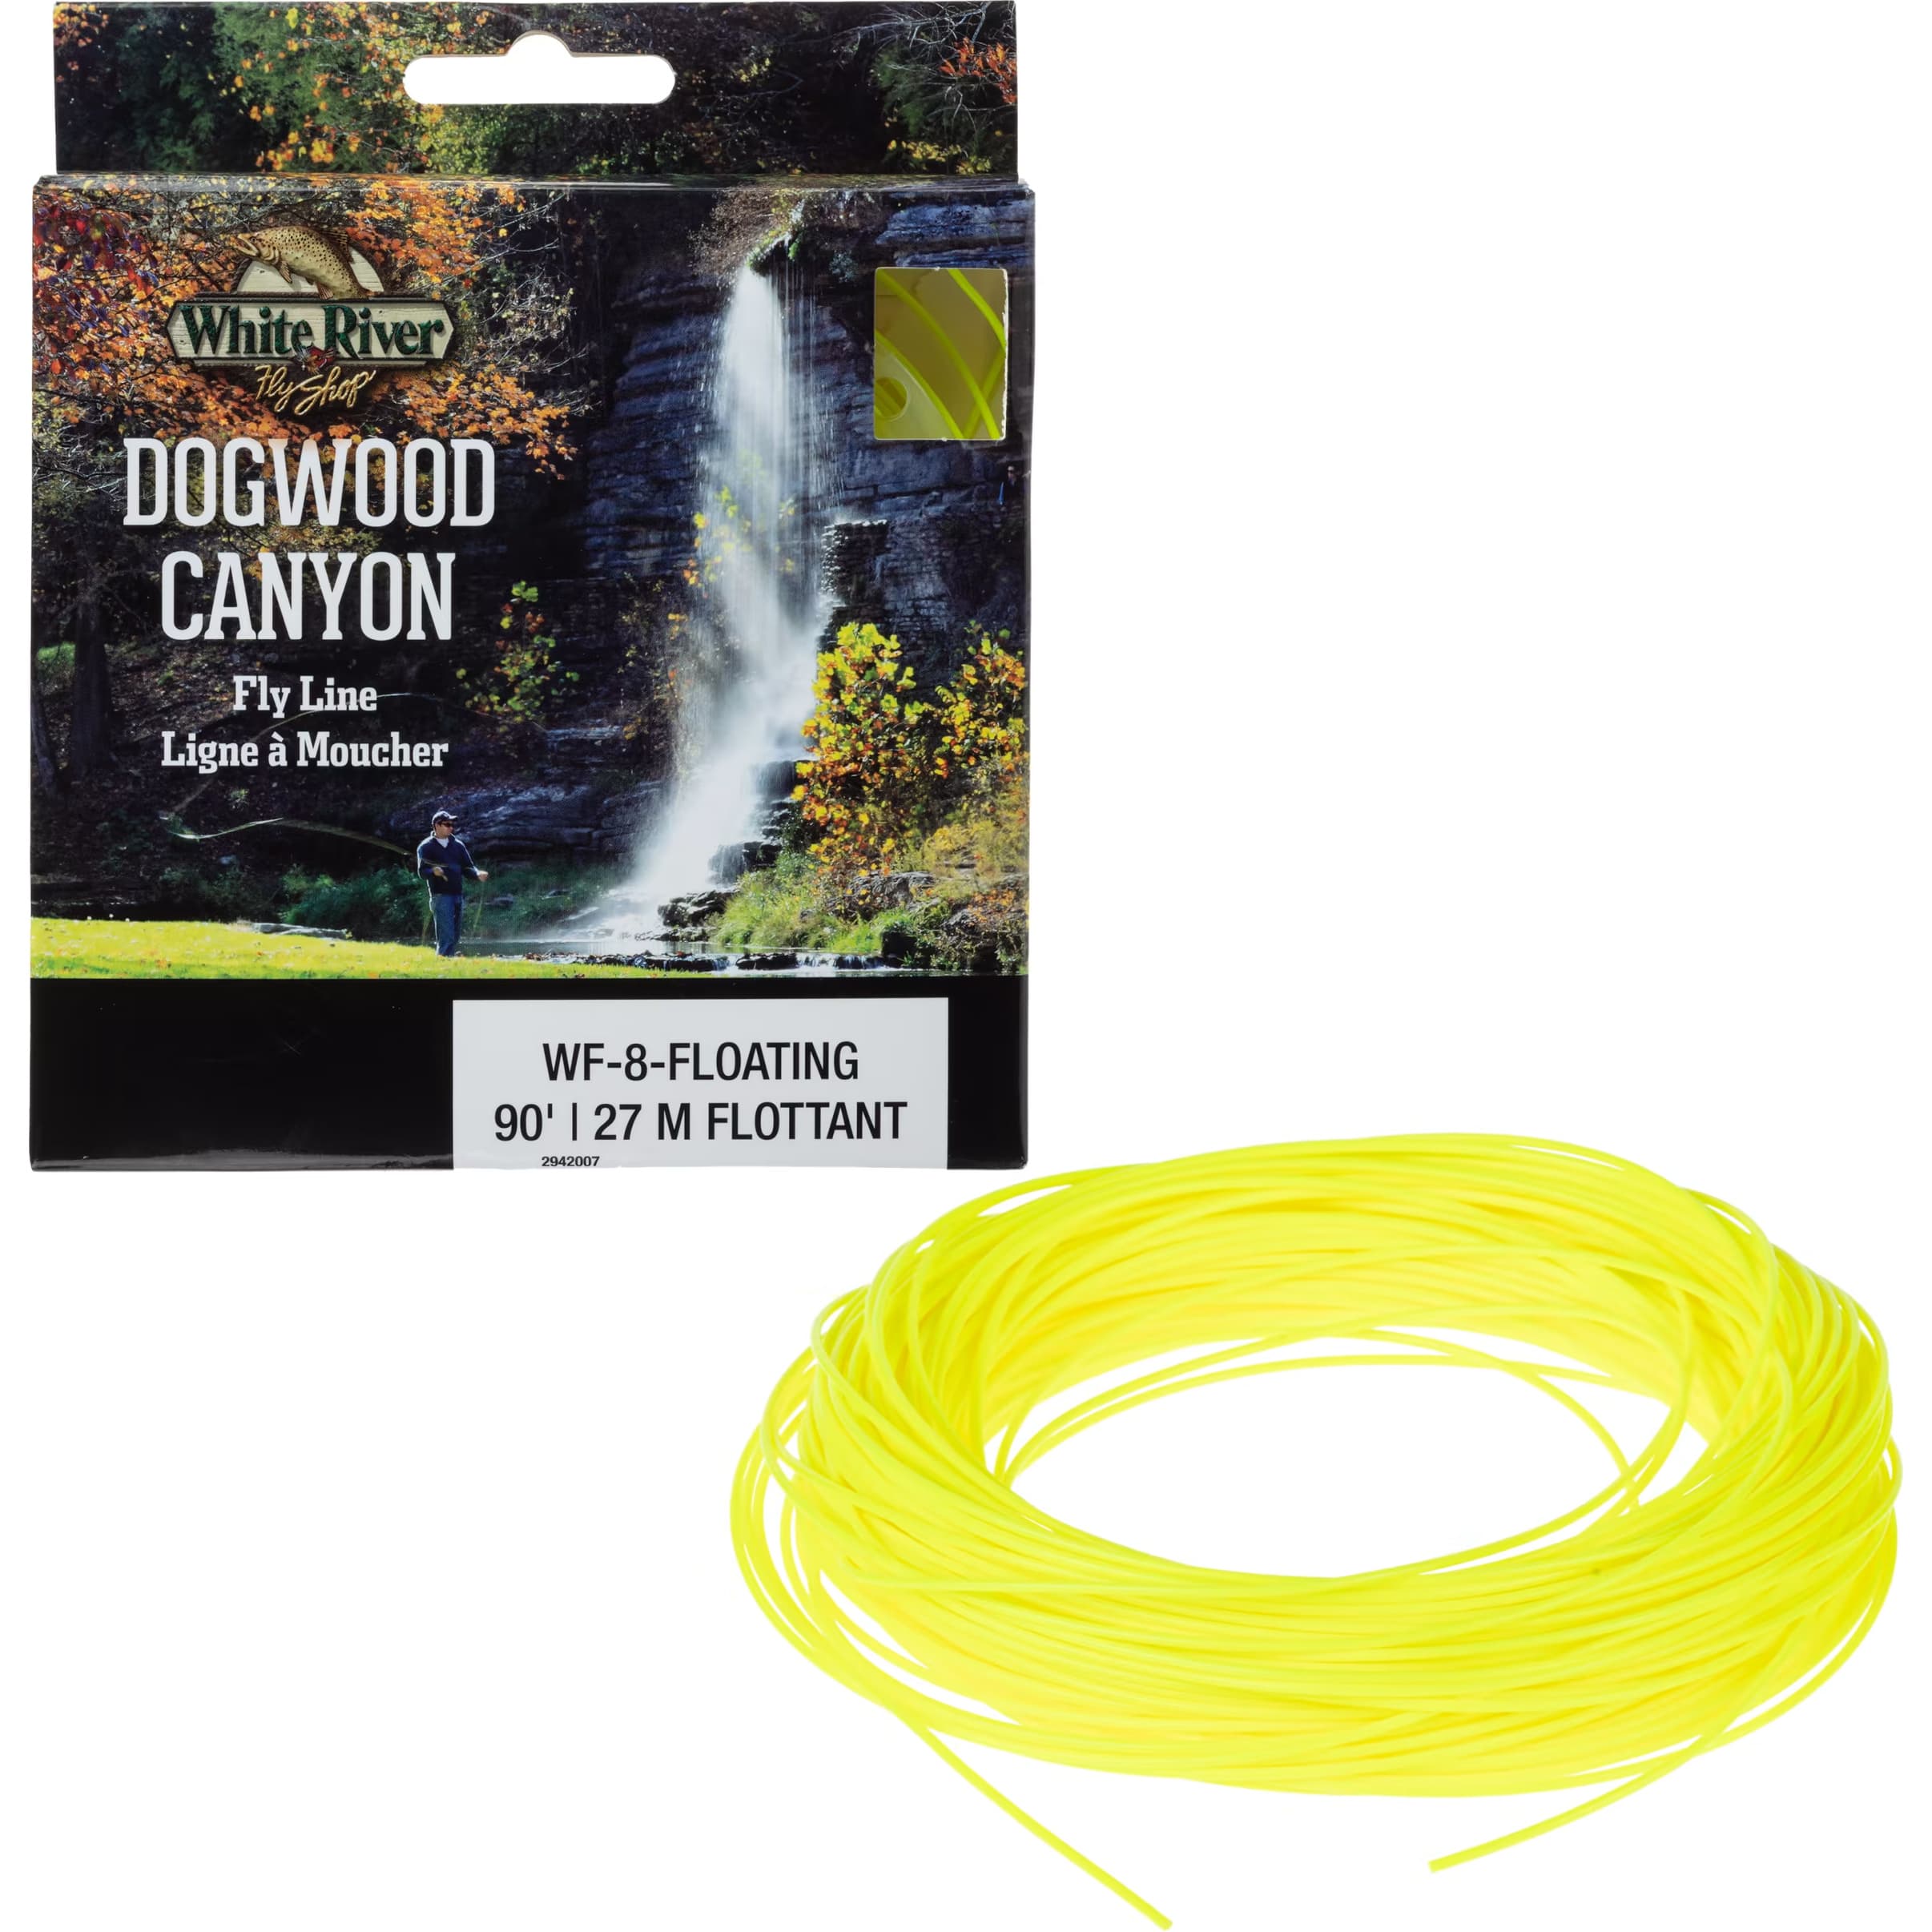 White River Fly Shop® Dogwood Canyon Fly Line